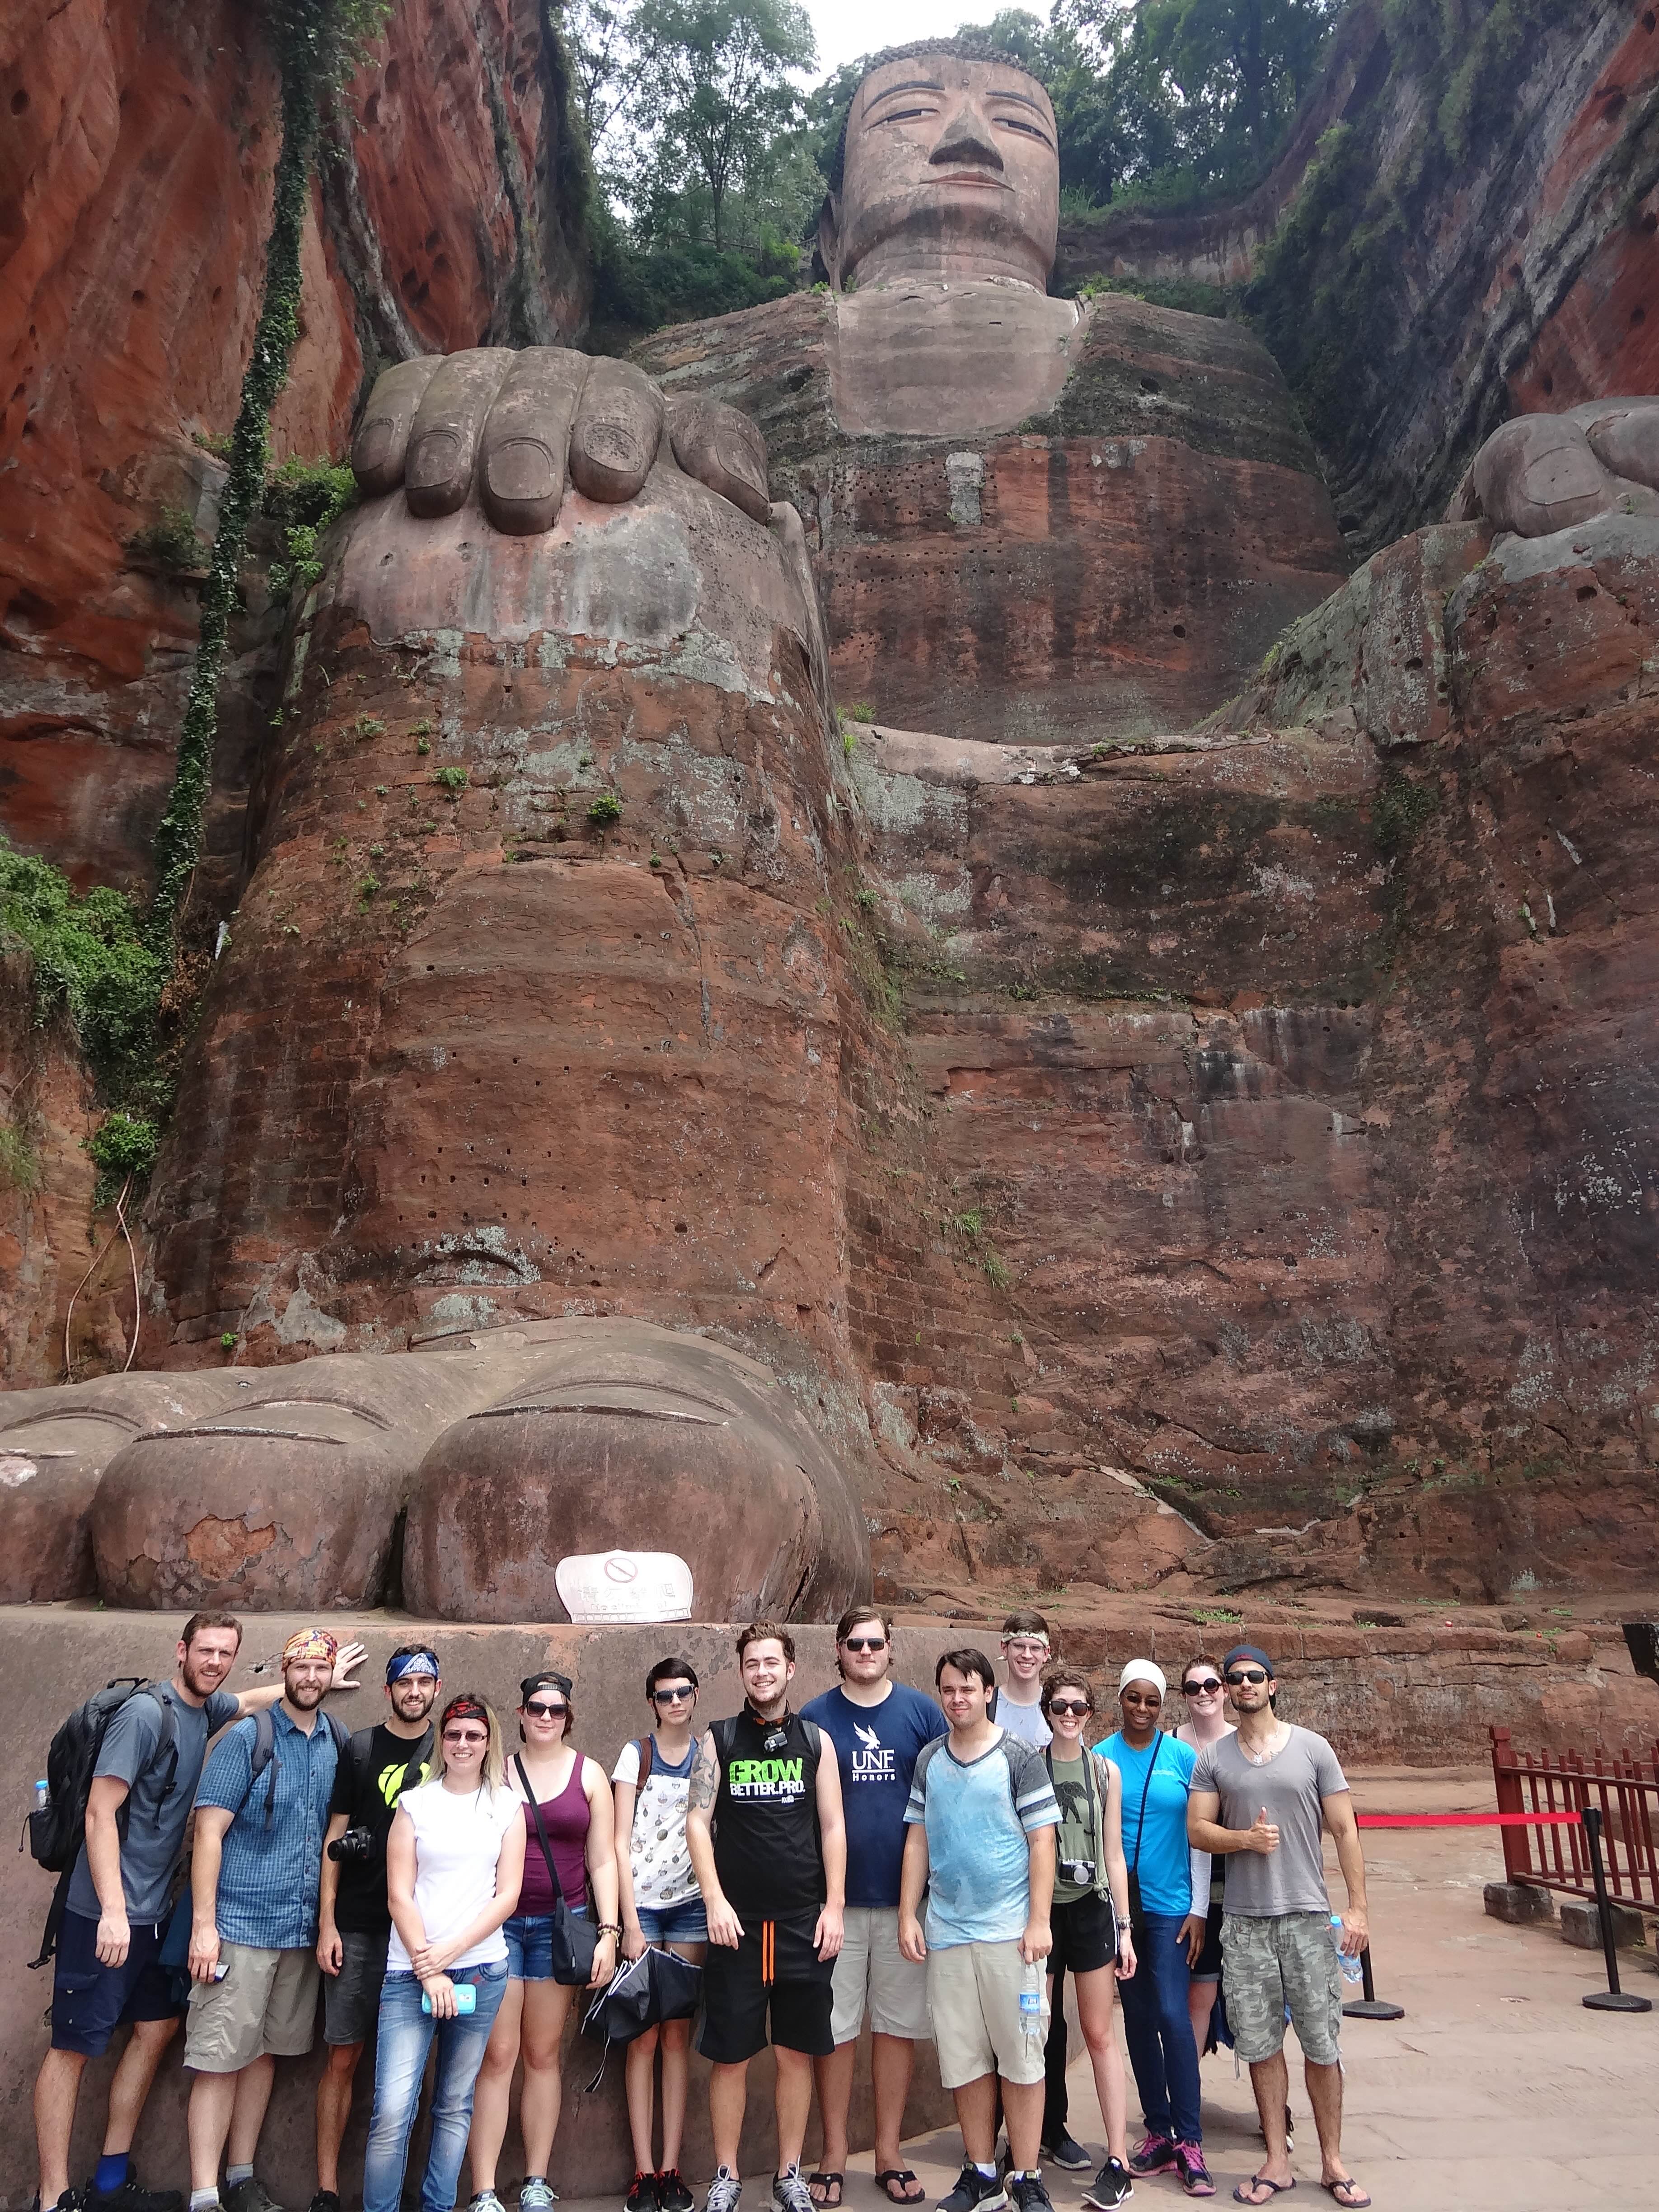 Group photo of study abroad students at the foot of the LeShan Buddha in China